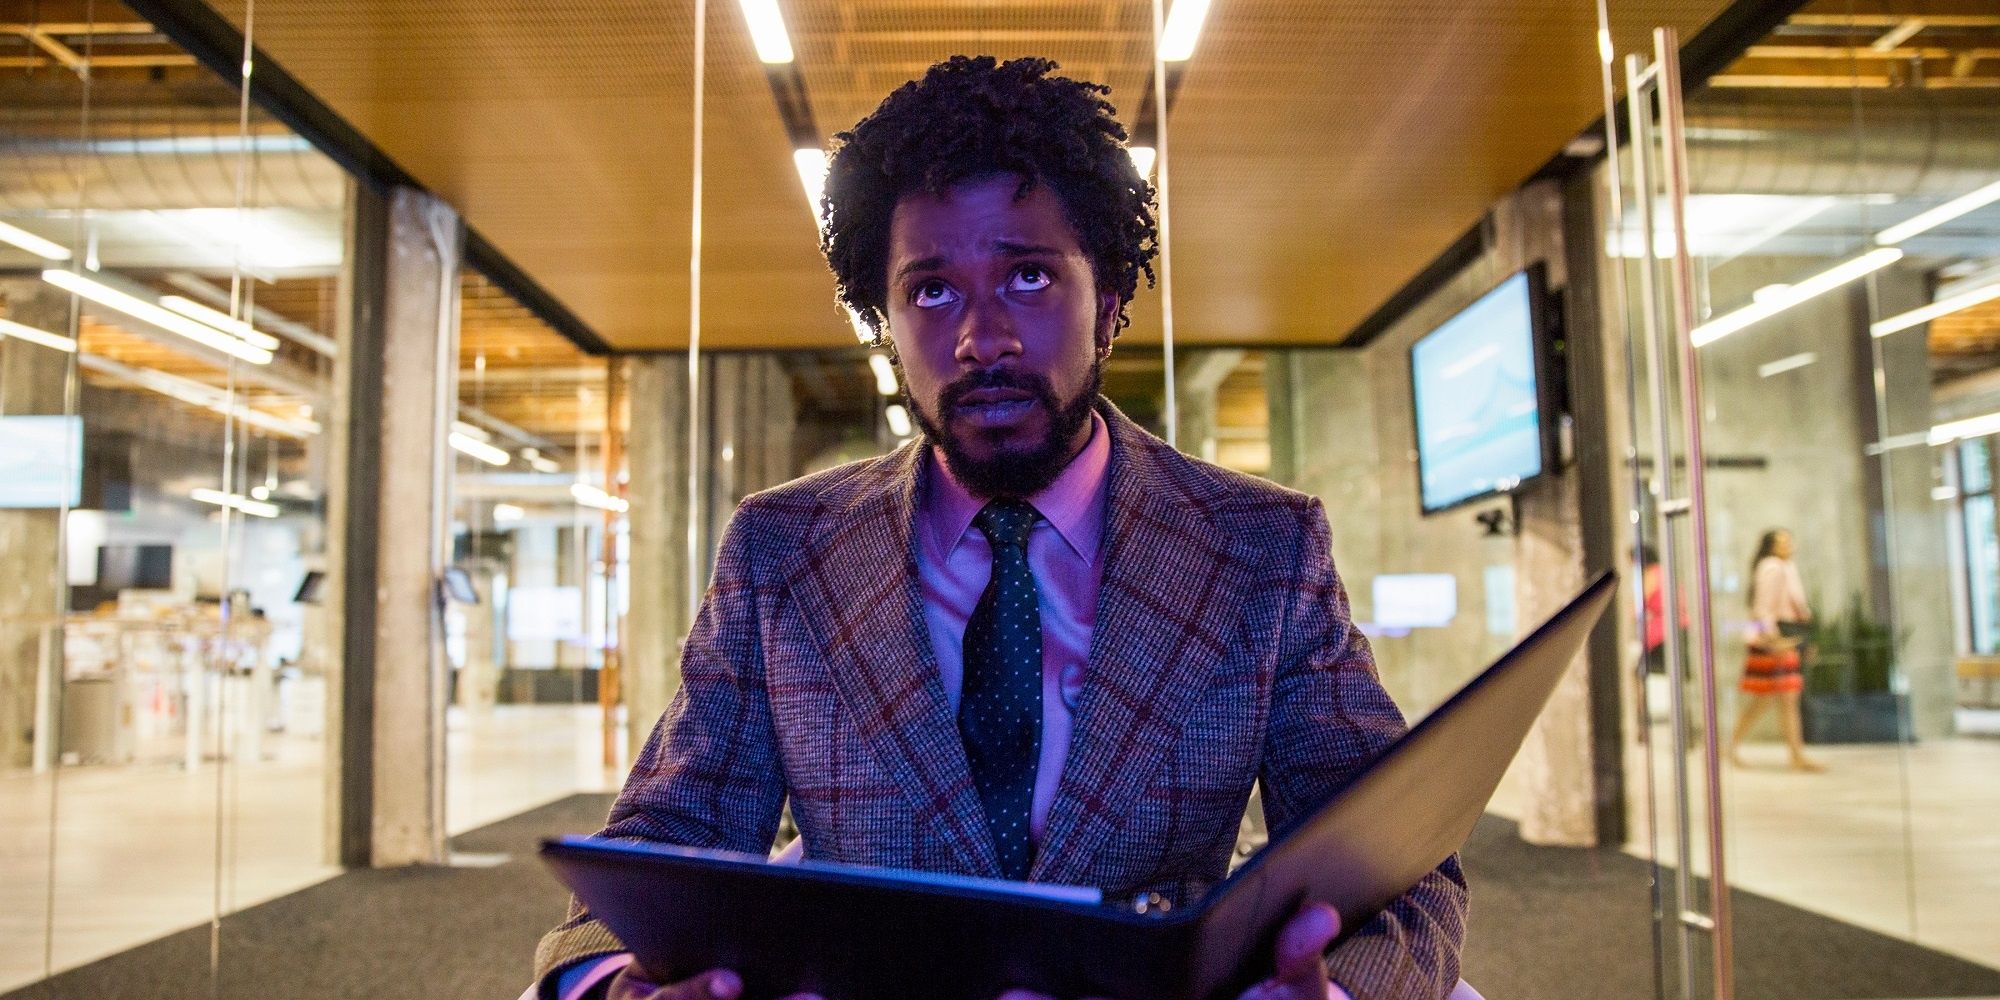 Cash sitting on the ground with a binder in Sorry To Bother You.